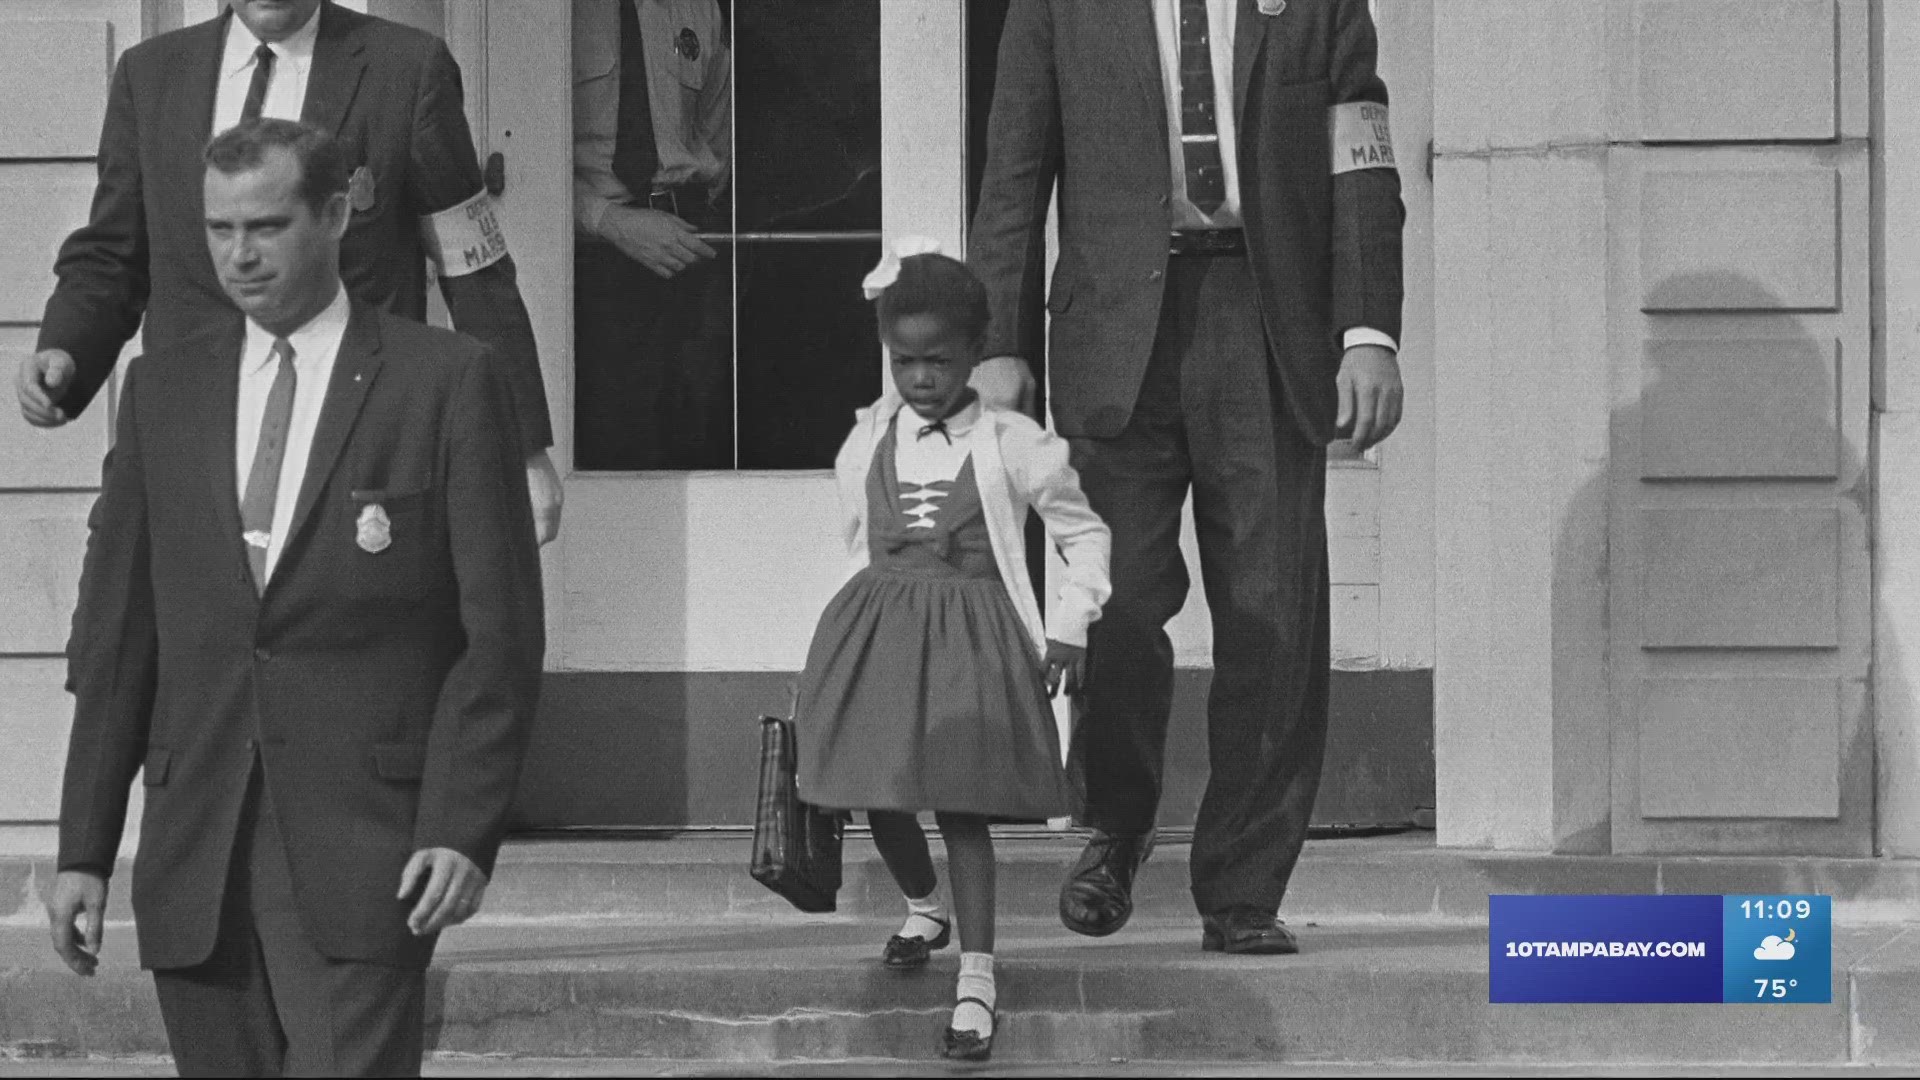 Ruby Bridges made history as a 6-year-old child when she became the first Black student to desegregate an all-white school in New Orleans in 1960.